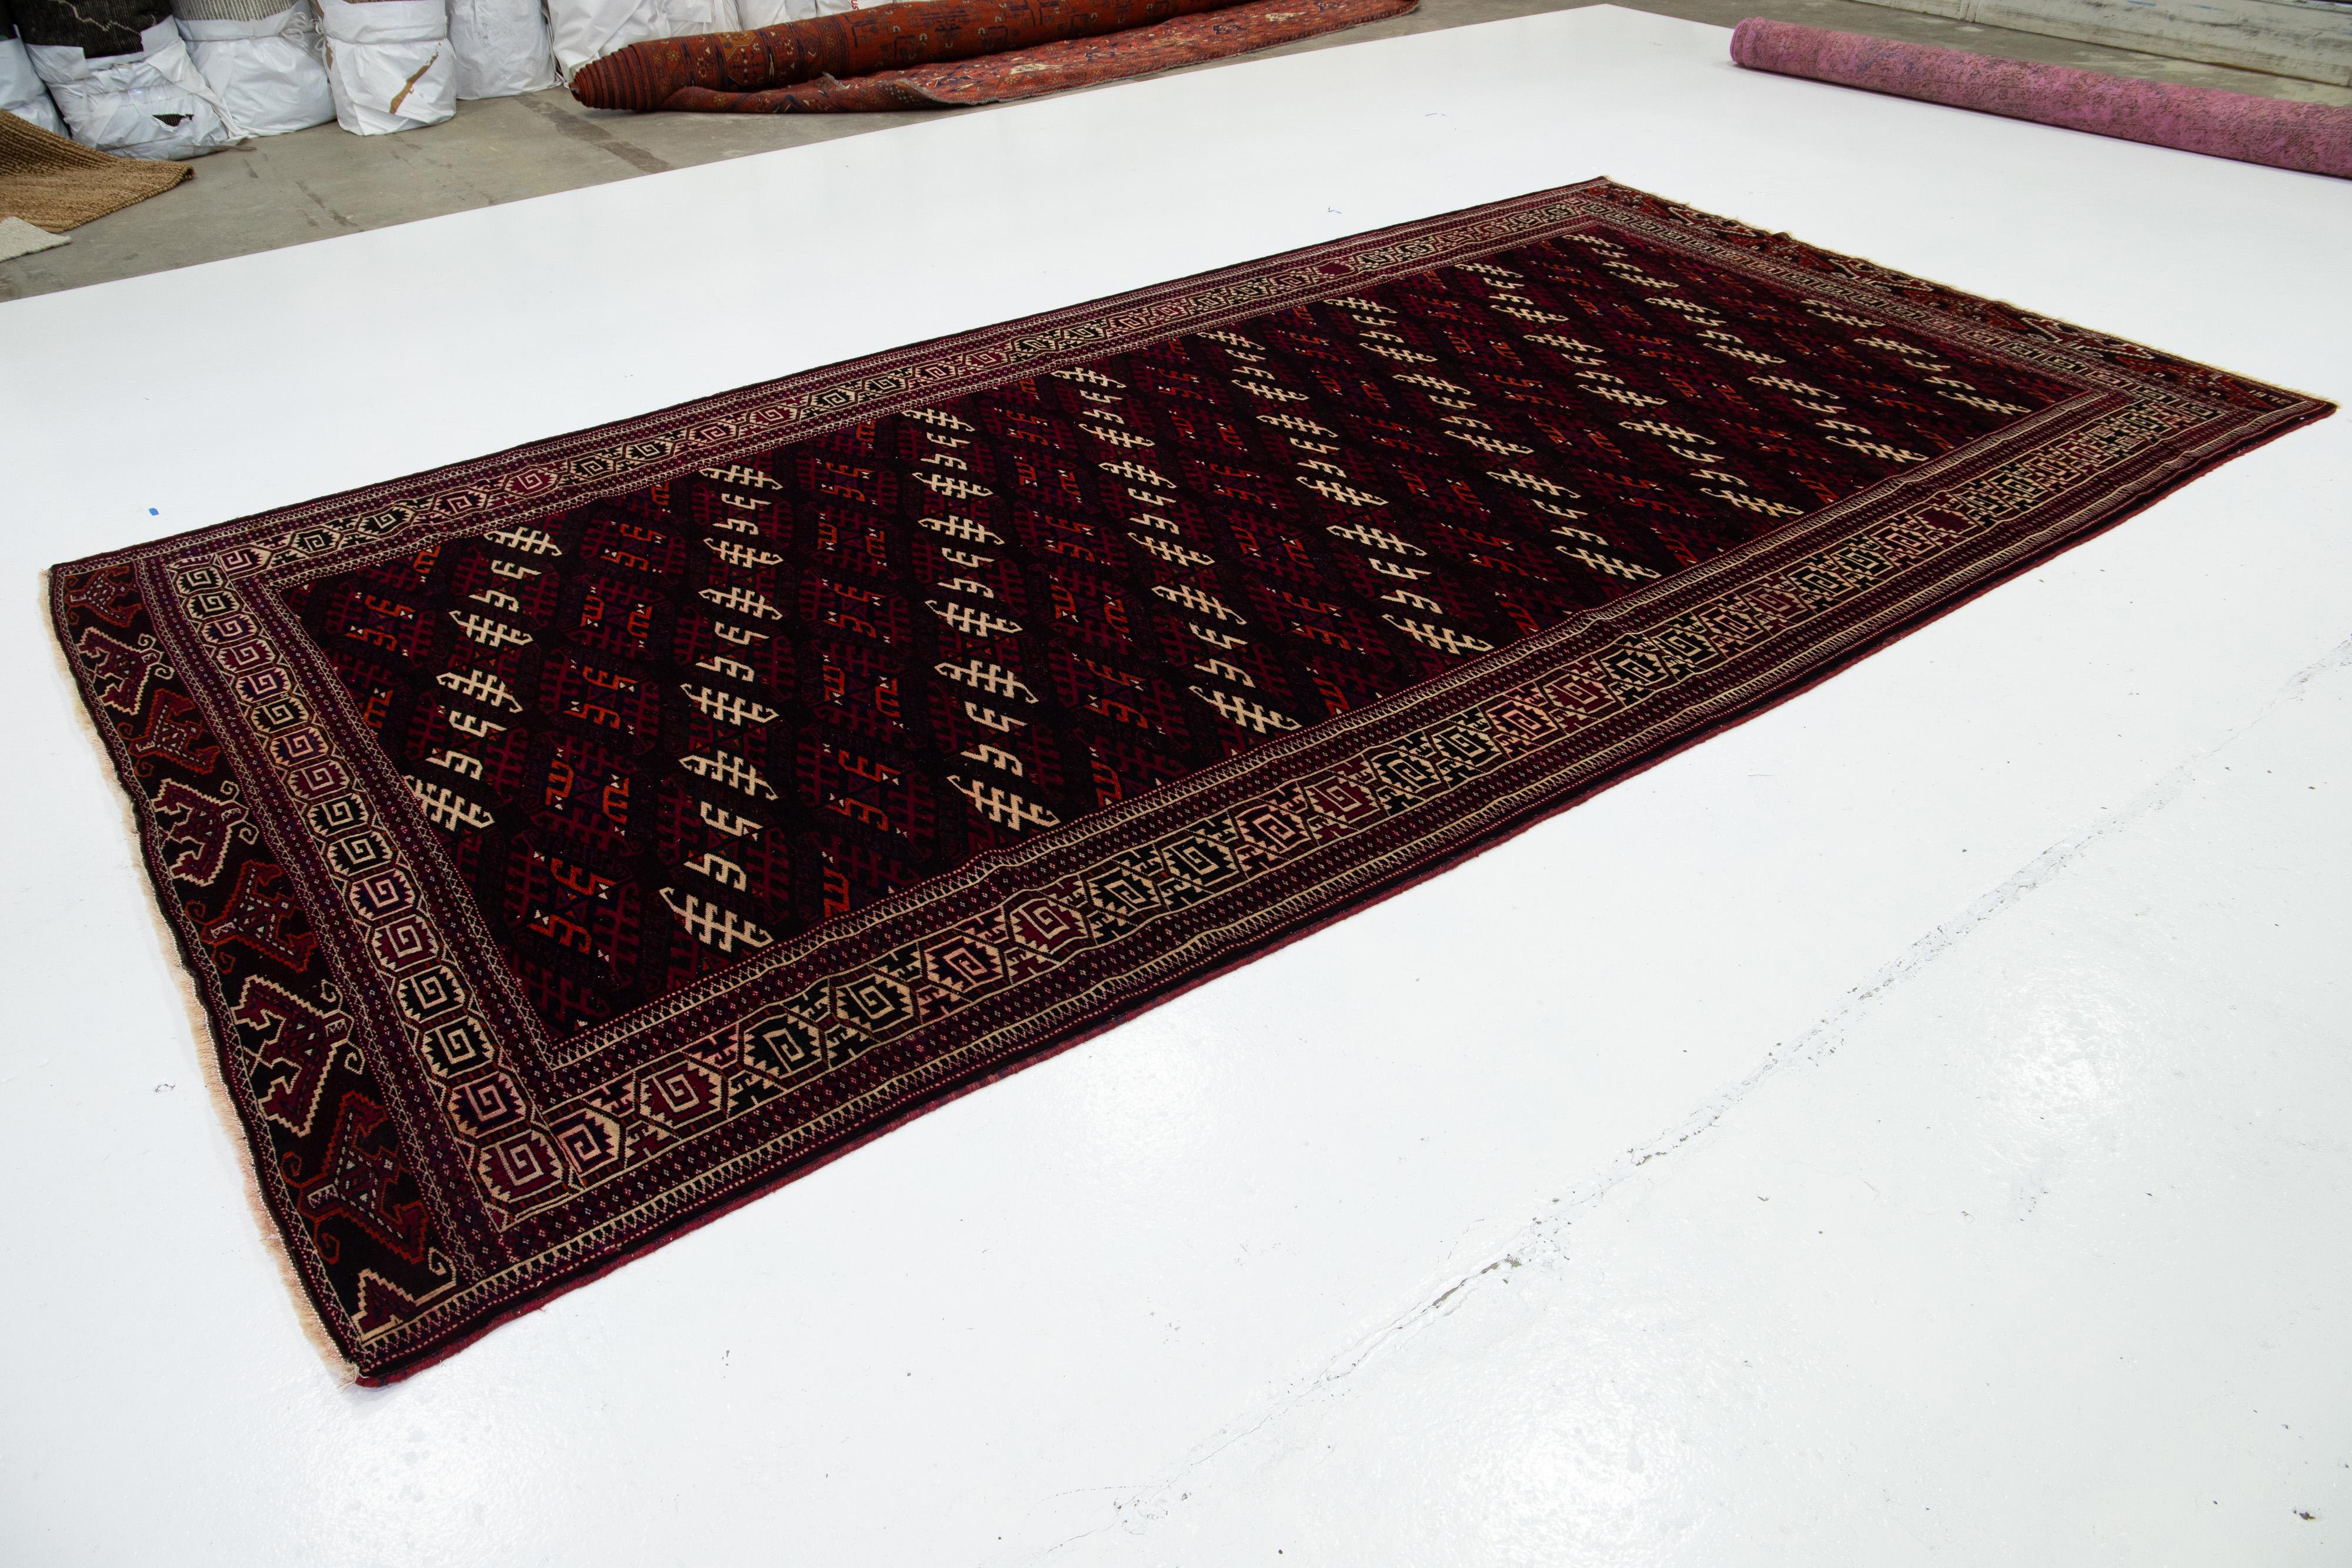 Allover Designed Handmade Afghan Wool Rug From 1930s In Burgundy Color In Excellent Condition For Sale In Norwalk, CT